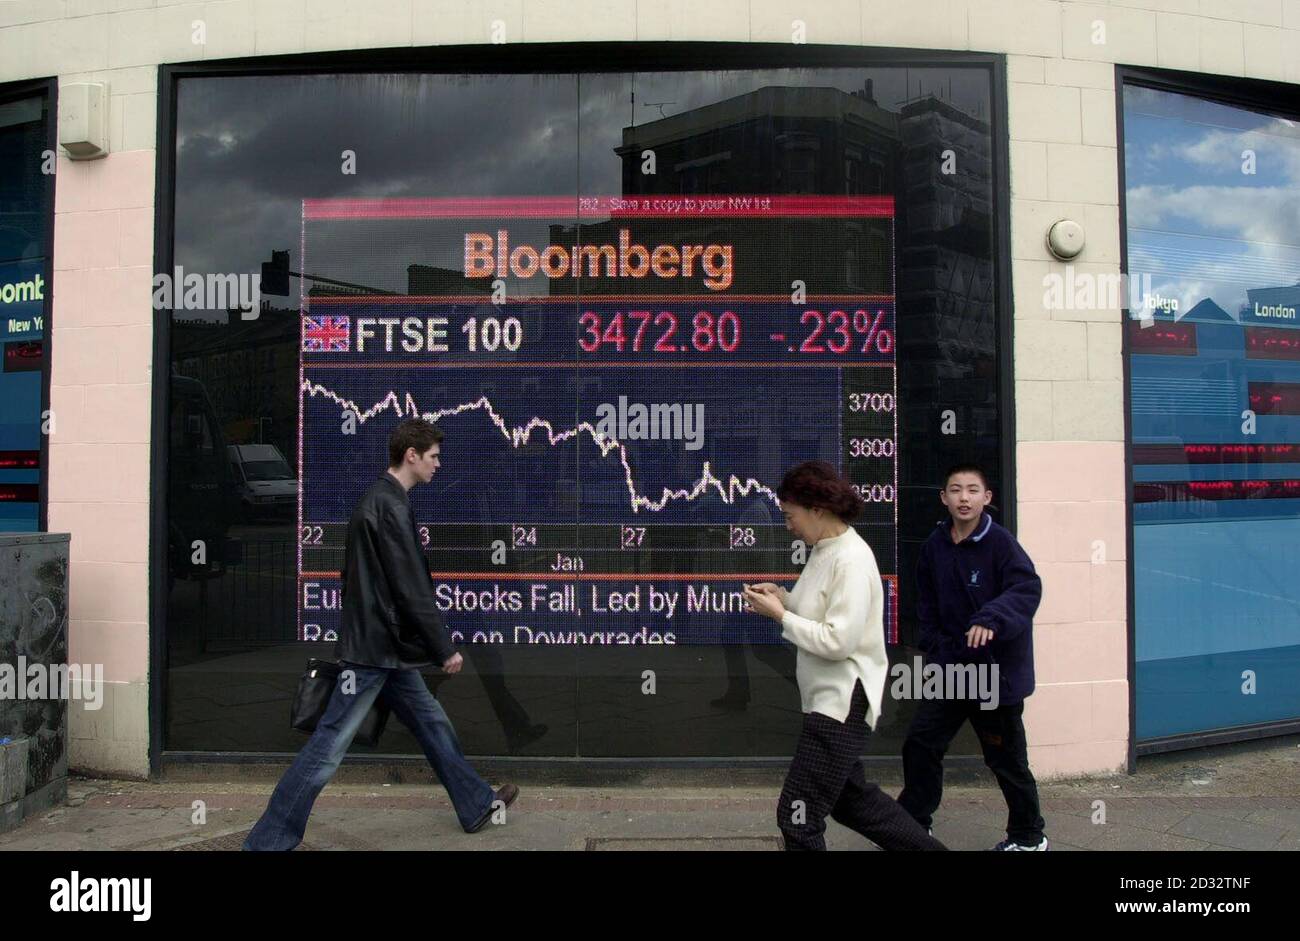 City traders were left biting their nails again as a welcome rally by the FTSE 100 Index ran out of steam in little over three hours. After racing nearly 60 points ahead early on, * ... it was a return to the same old story as jitters resurfaced and the Footsie tumbled back to its seven-year low. 26/3/04: Three years of falling stock markets have put Britons off investing and led them to keep a higher proportion of their money in deposit accounts, a report claimed. Market analyst Datamonitor said the level of UK households' savings and investments rose by an average of just 3% a year betw Stock Photo